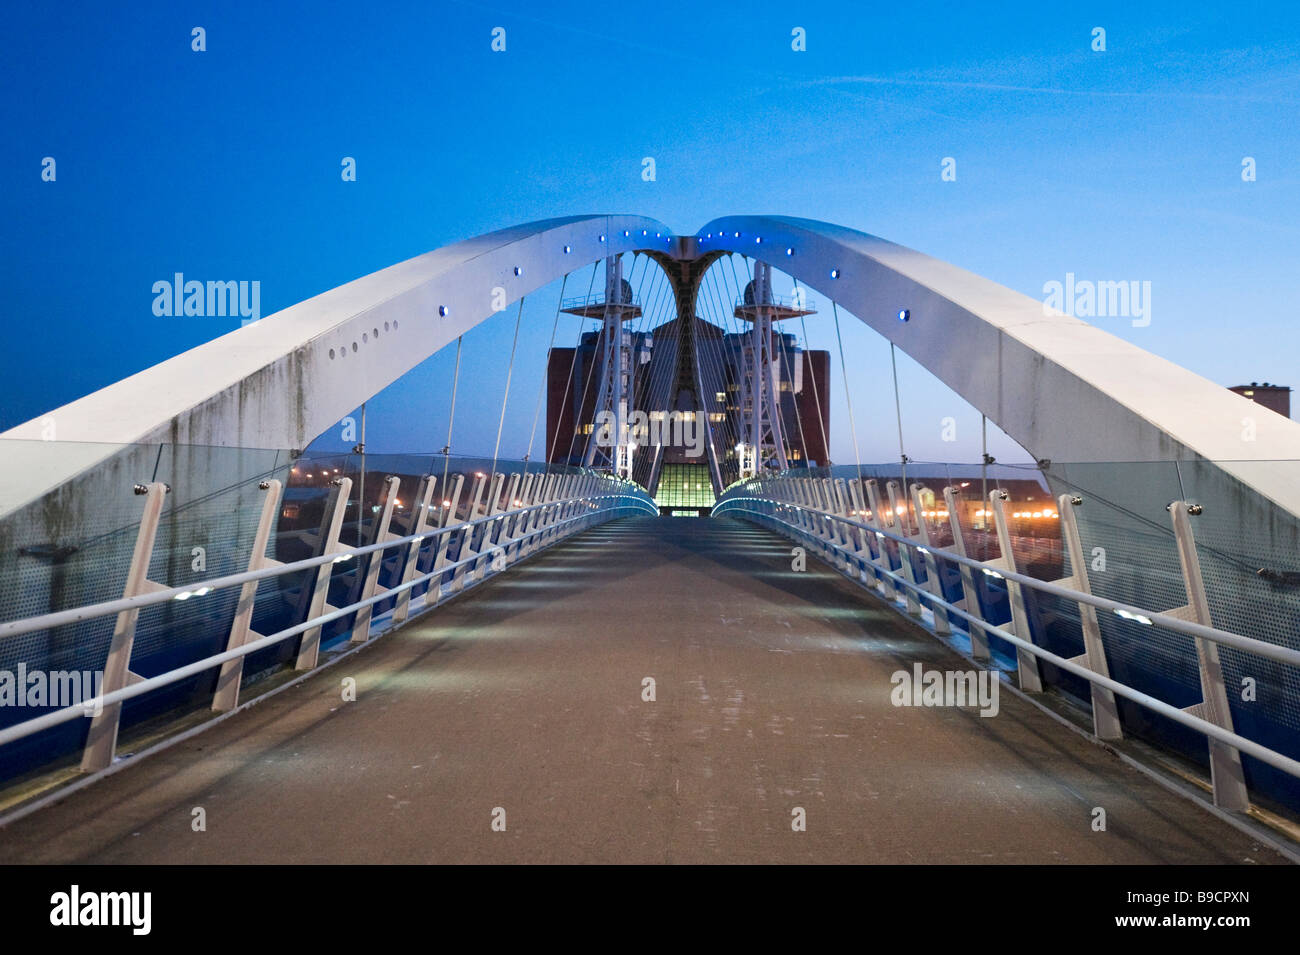 The Millennium lifting footbridge over the Manchester Ship Canal at night, Salford Quays, Greater Manchester, England Stock Photo